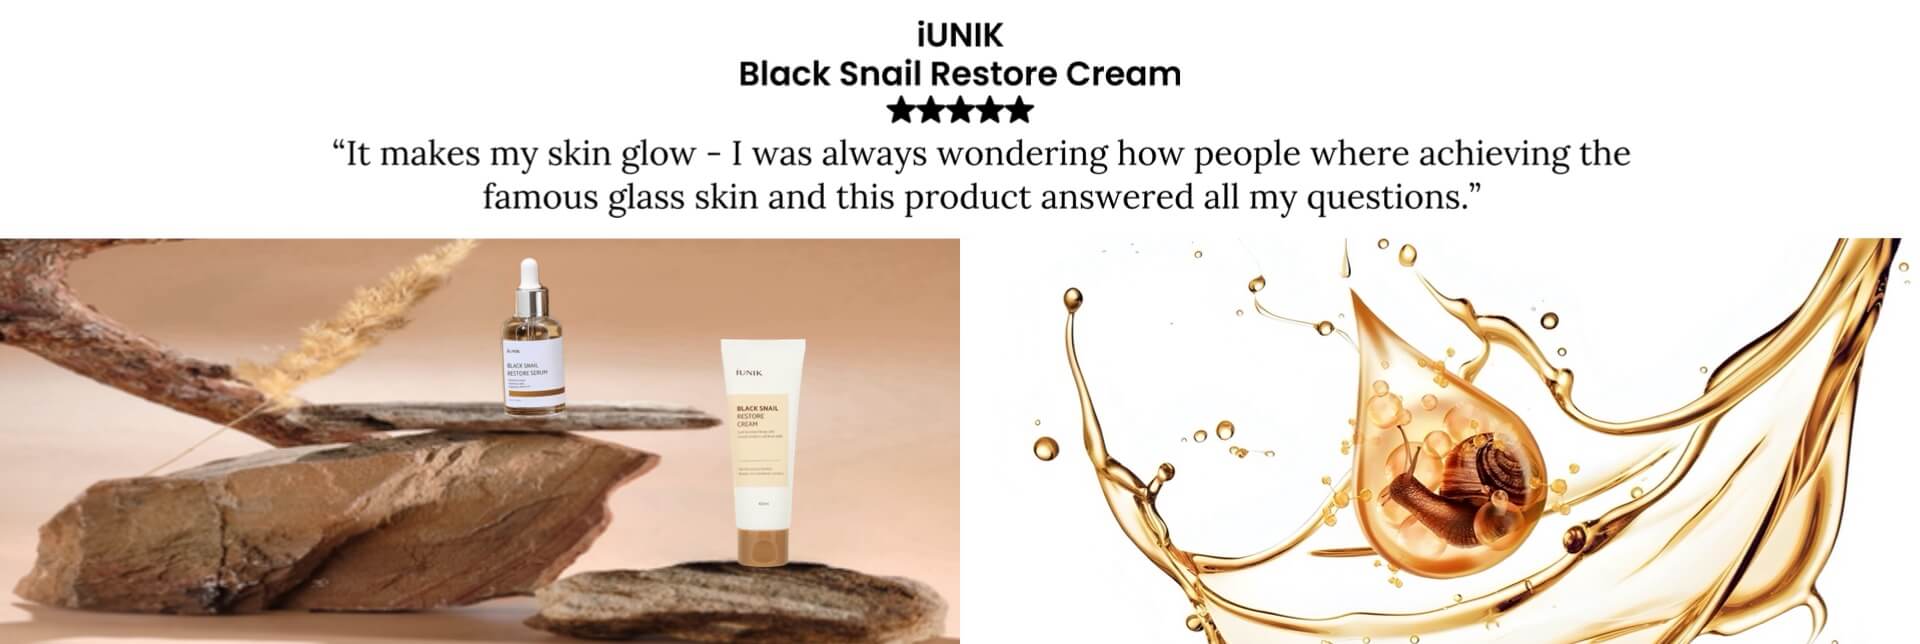 Serene image - IUNIK black snail products on top of stones link to black snail cream